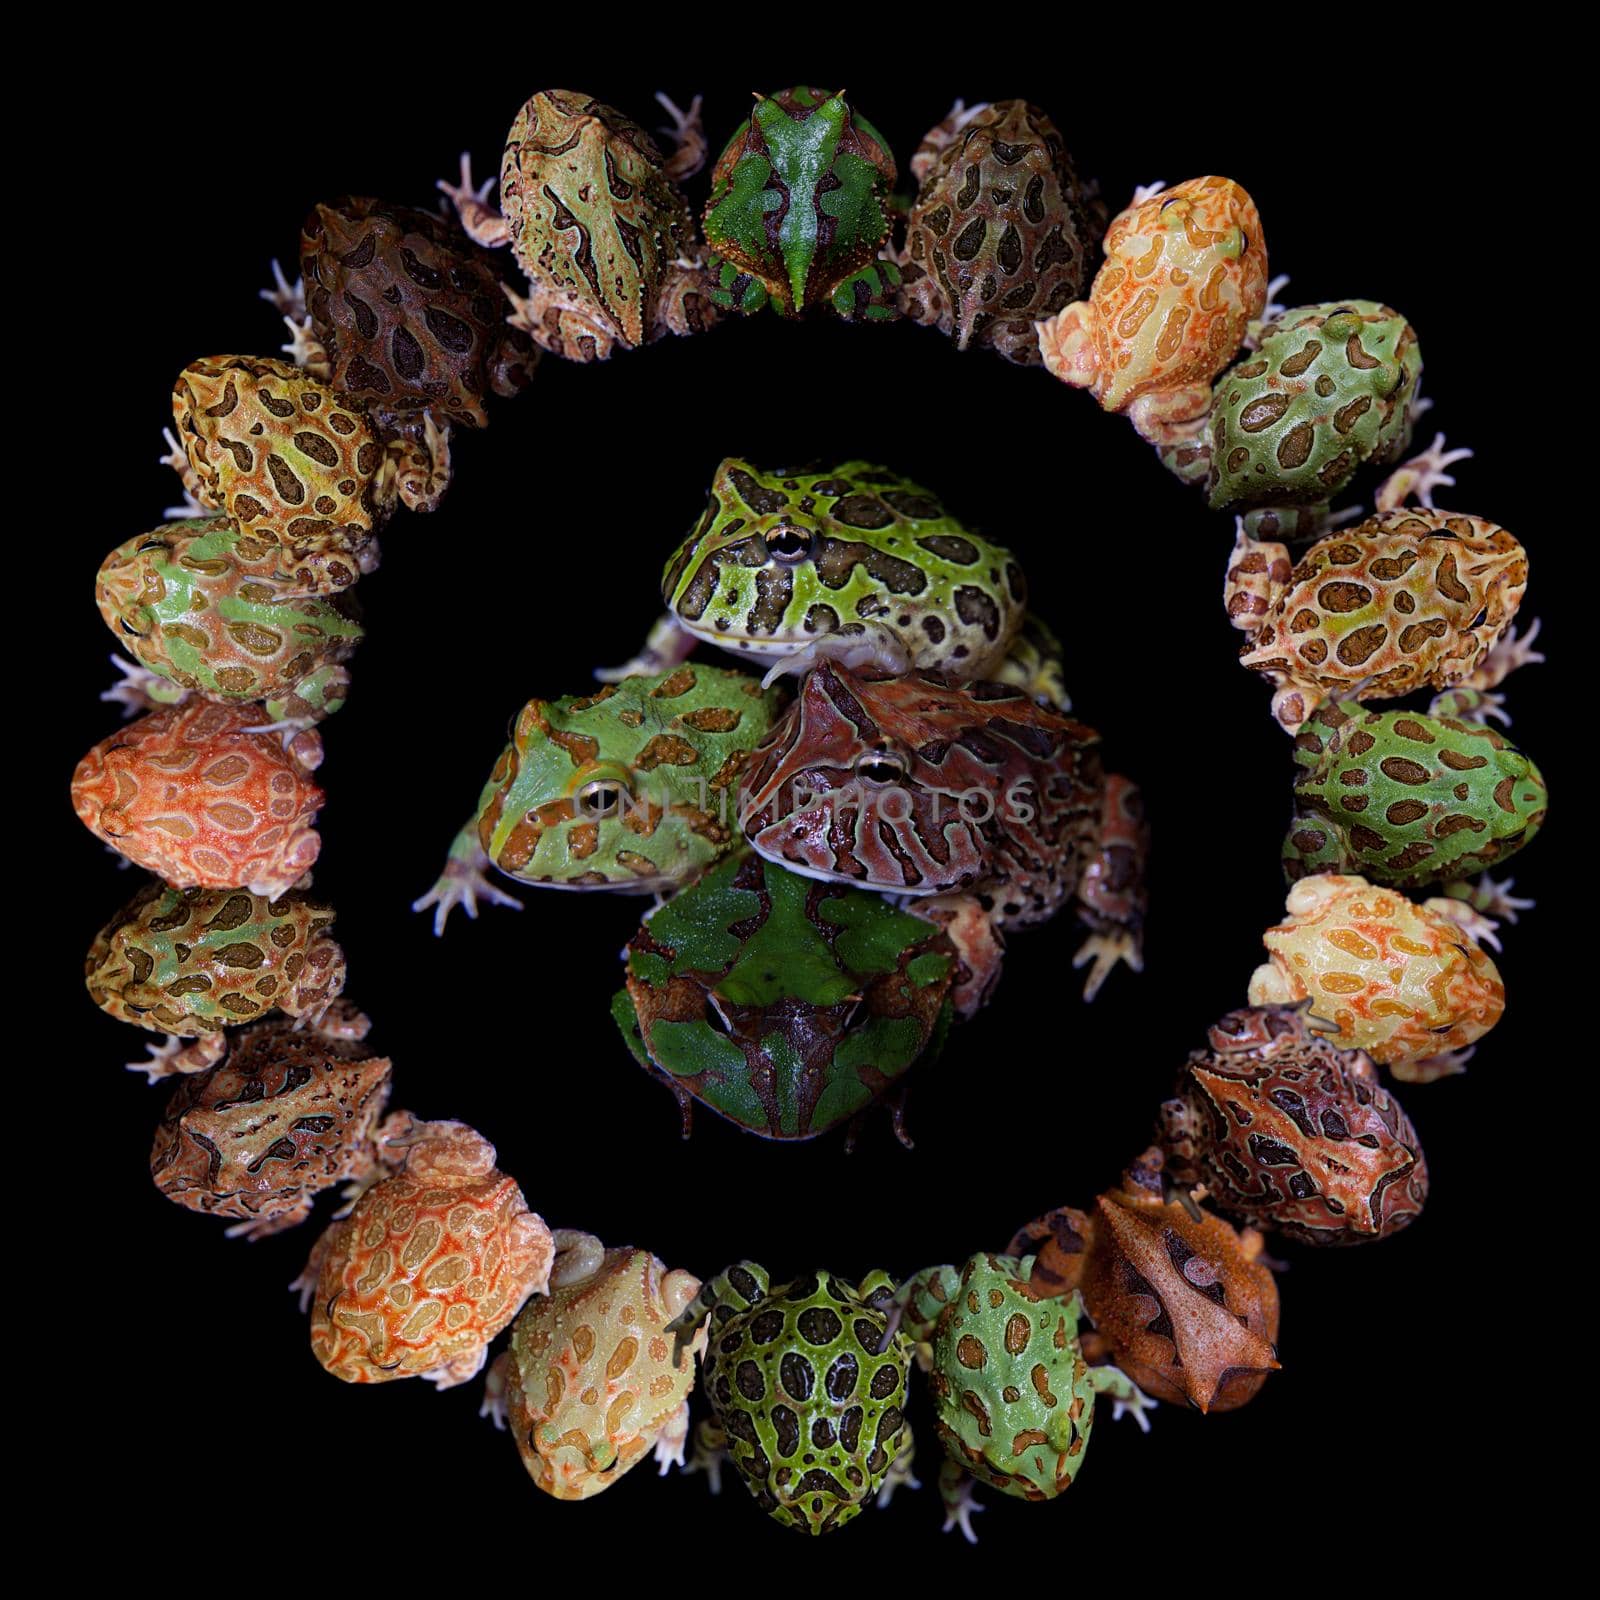 The pacman frogs in ring, Ceratophrys genus, isolated on black background